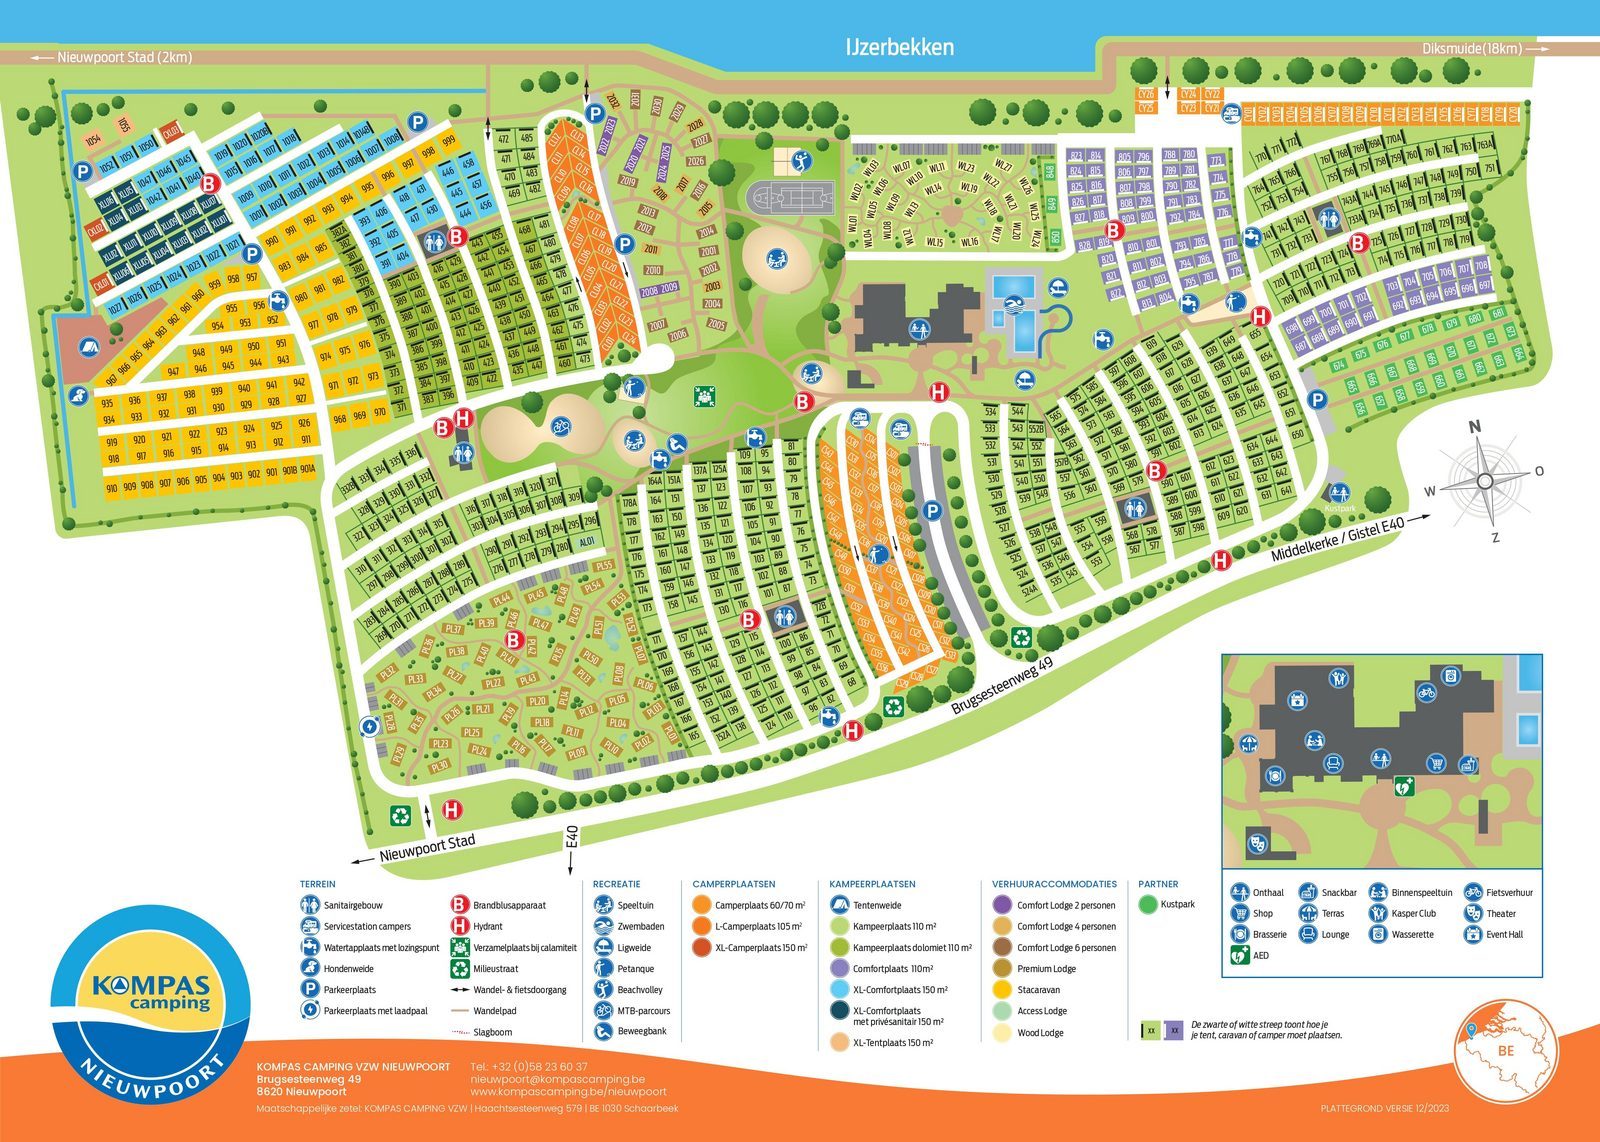 plattegrond_kompas_camping_nieuwpoort_12.2023_pages_to_jpg_0001_49492f35-d126-458e-9655-7d833838c29f.jpg